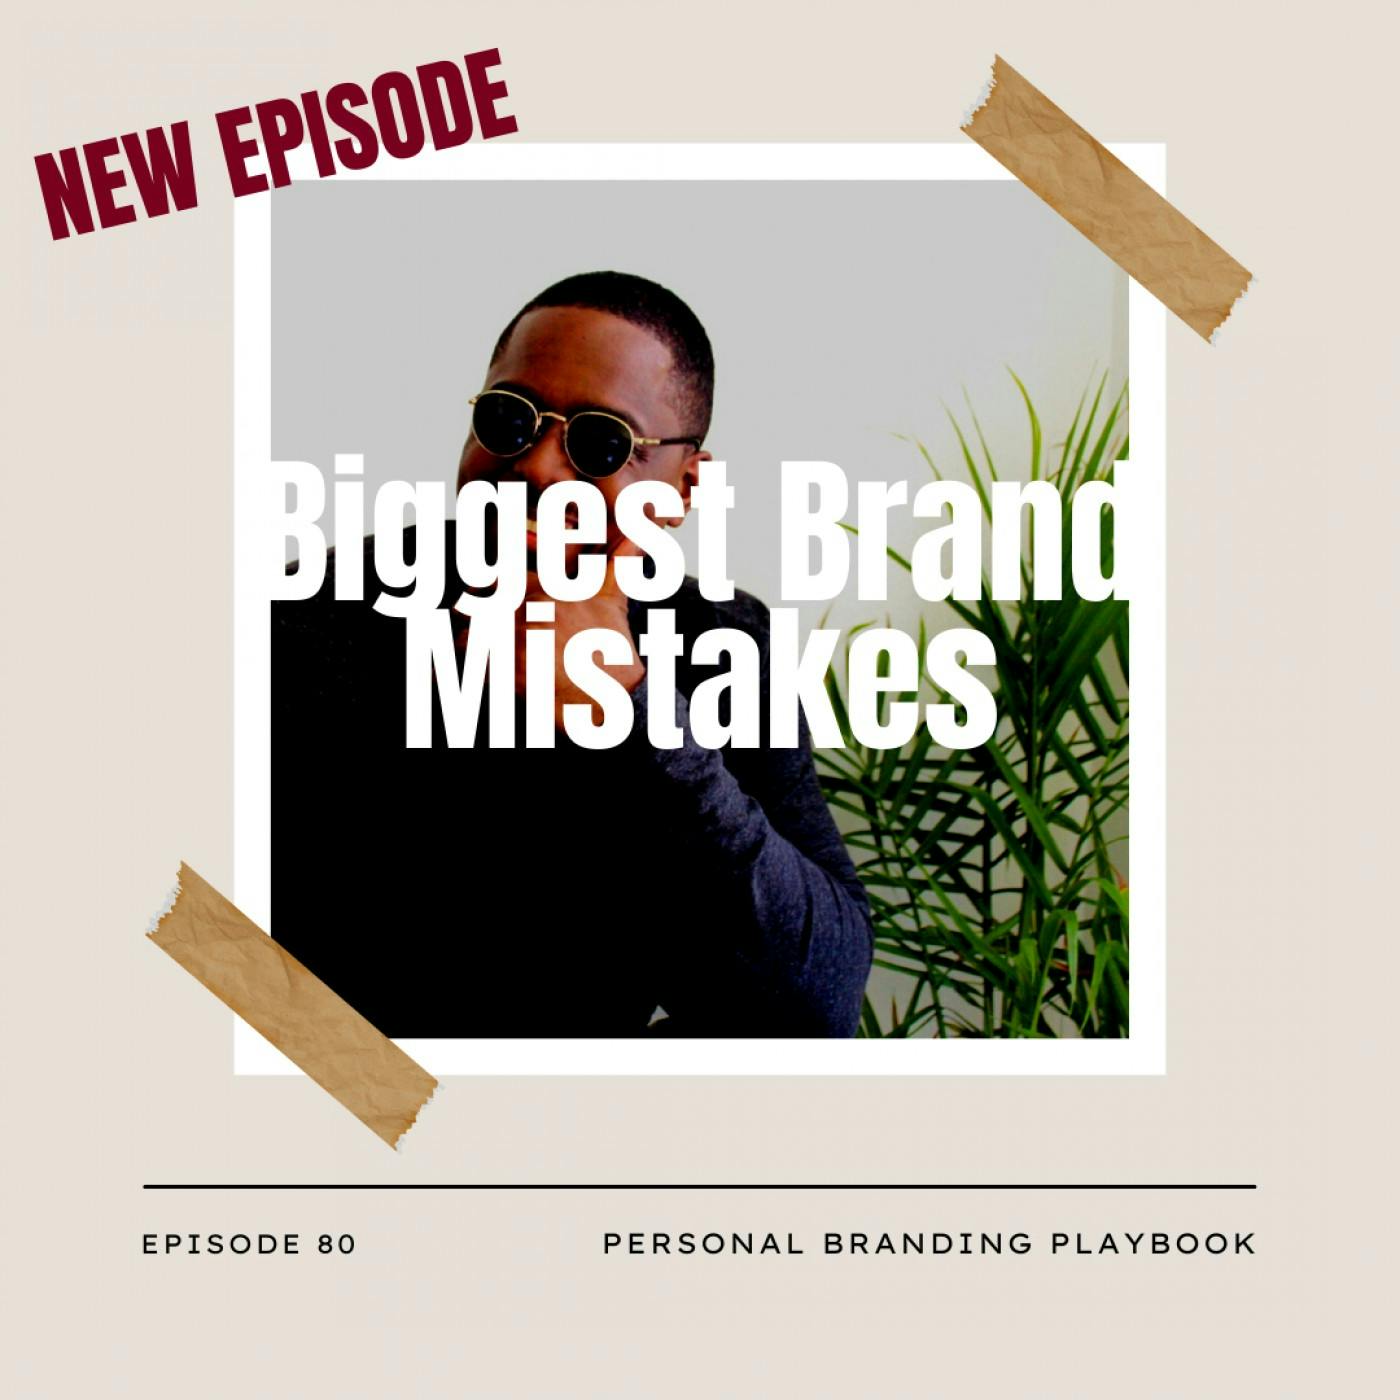 Avoid the Biggest Brand Mistakes